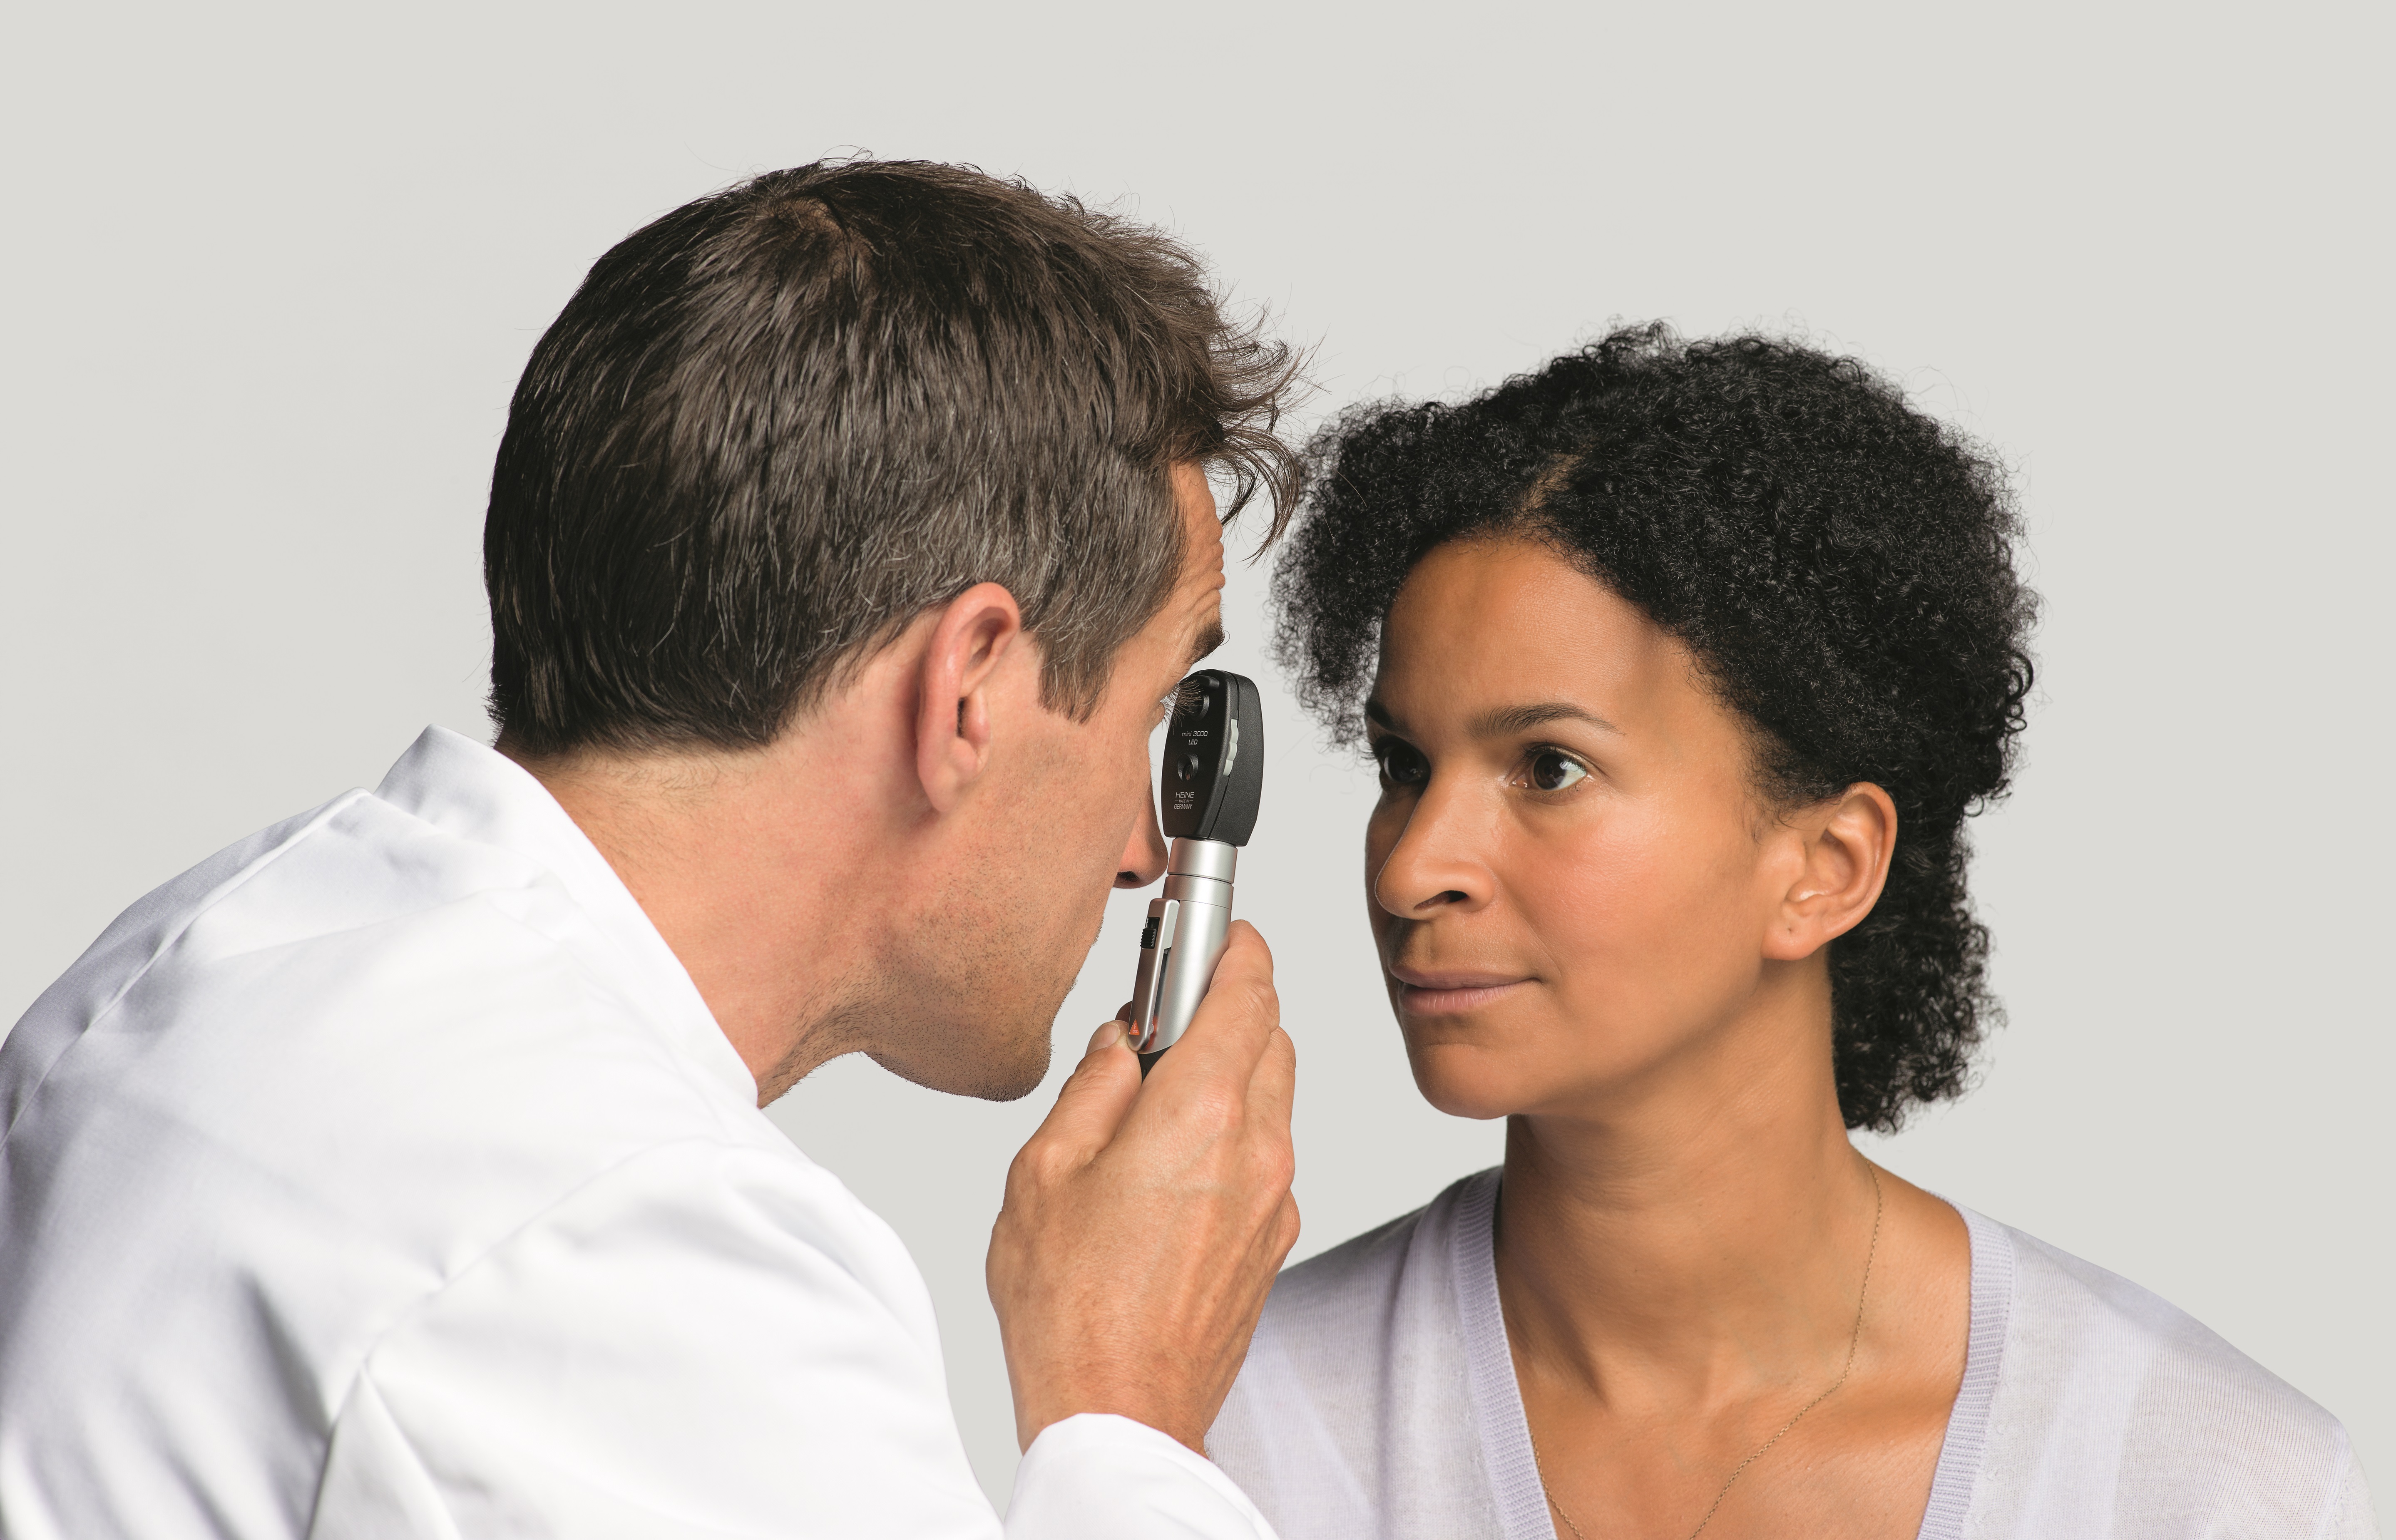 The small compact design is ideal for versatility when examining patients